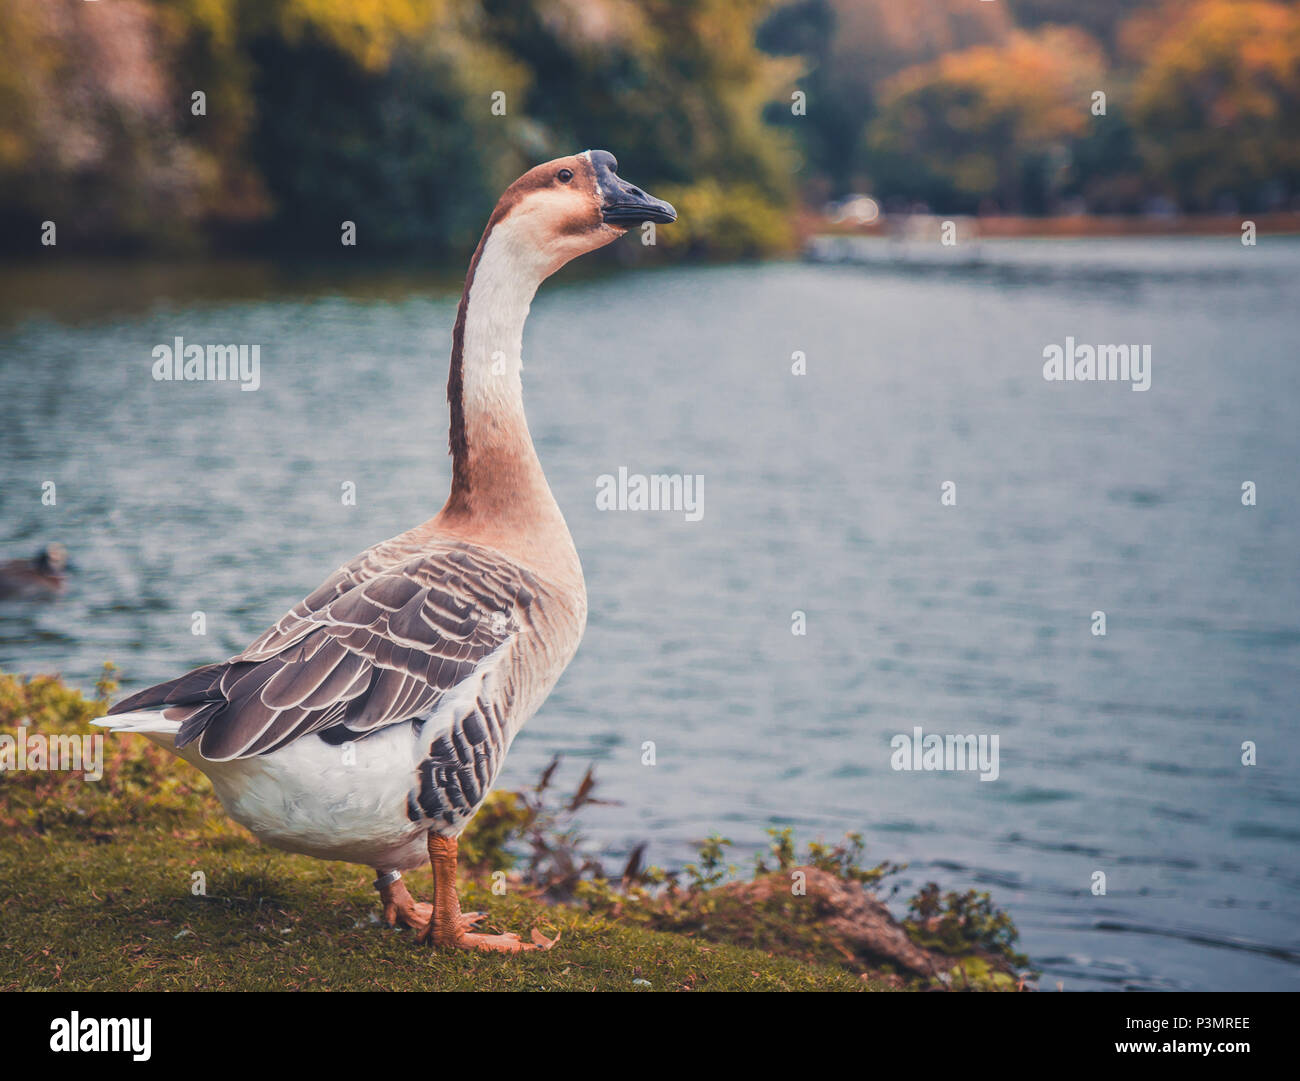 It's a shoot from a duck at Ibirapuera's park in São Paulo, Brazil Stock Photo